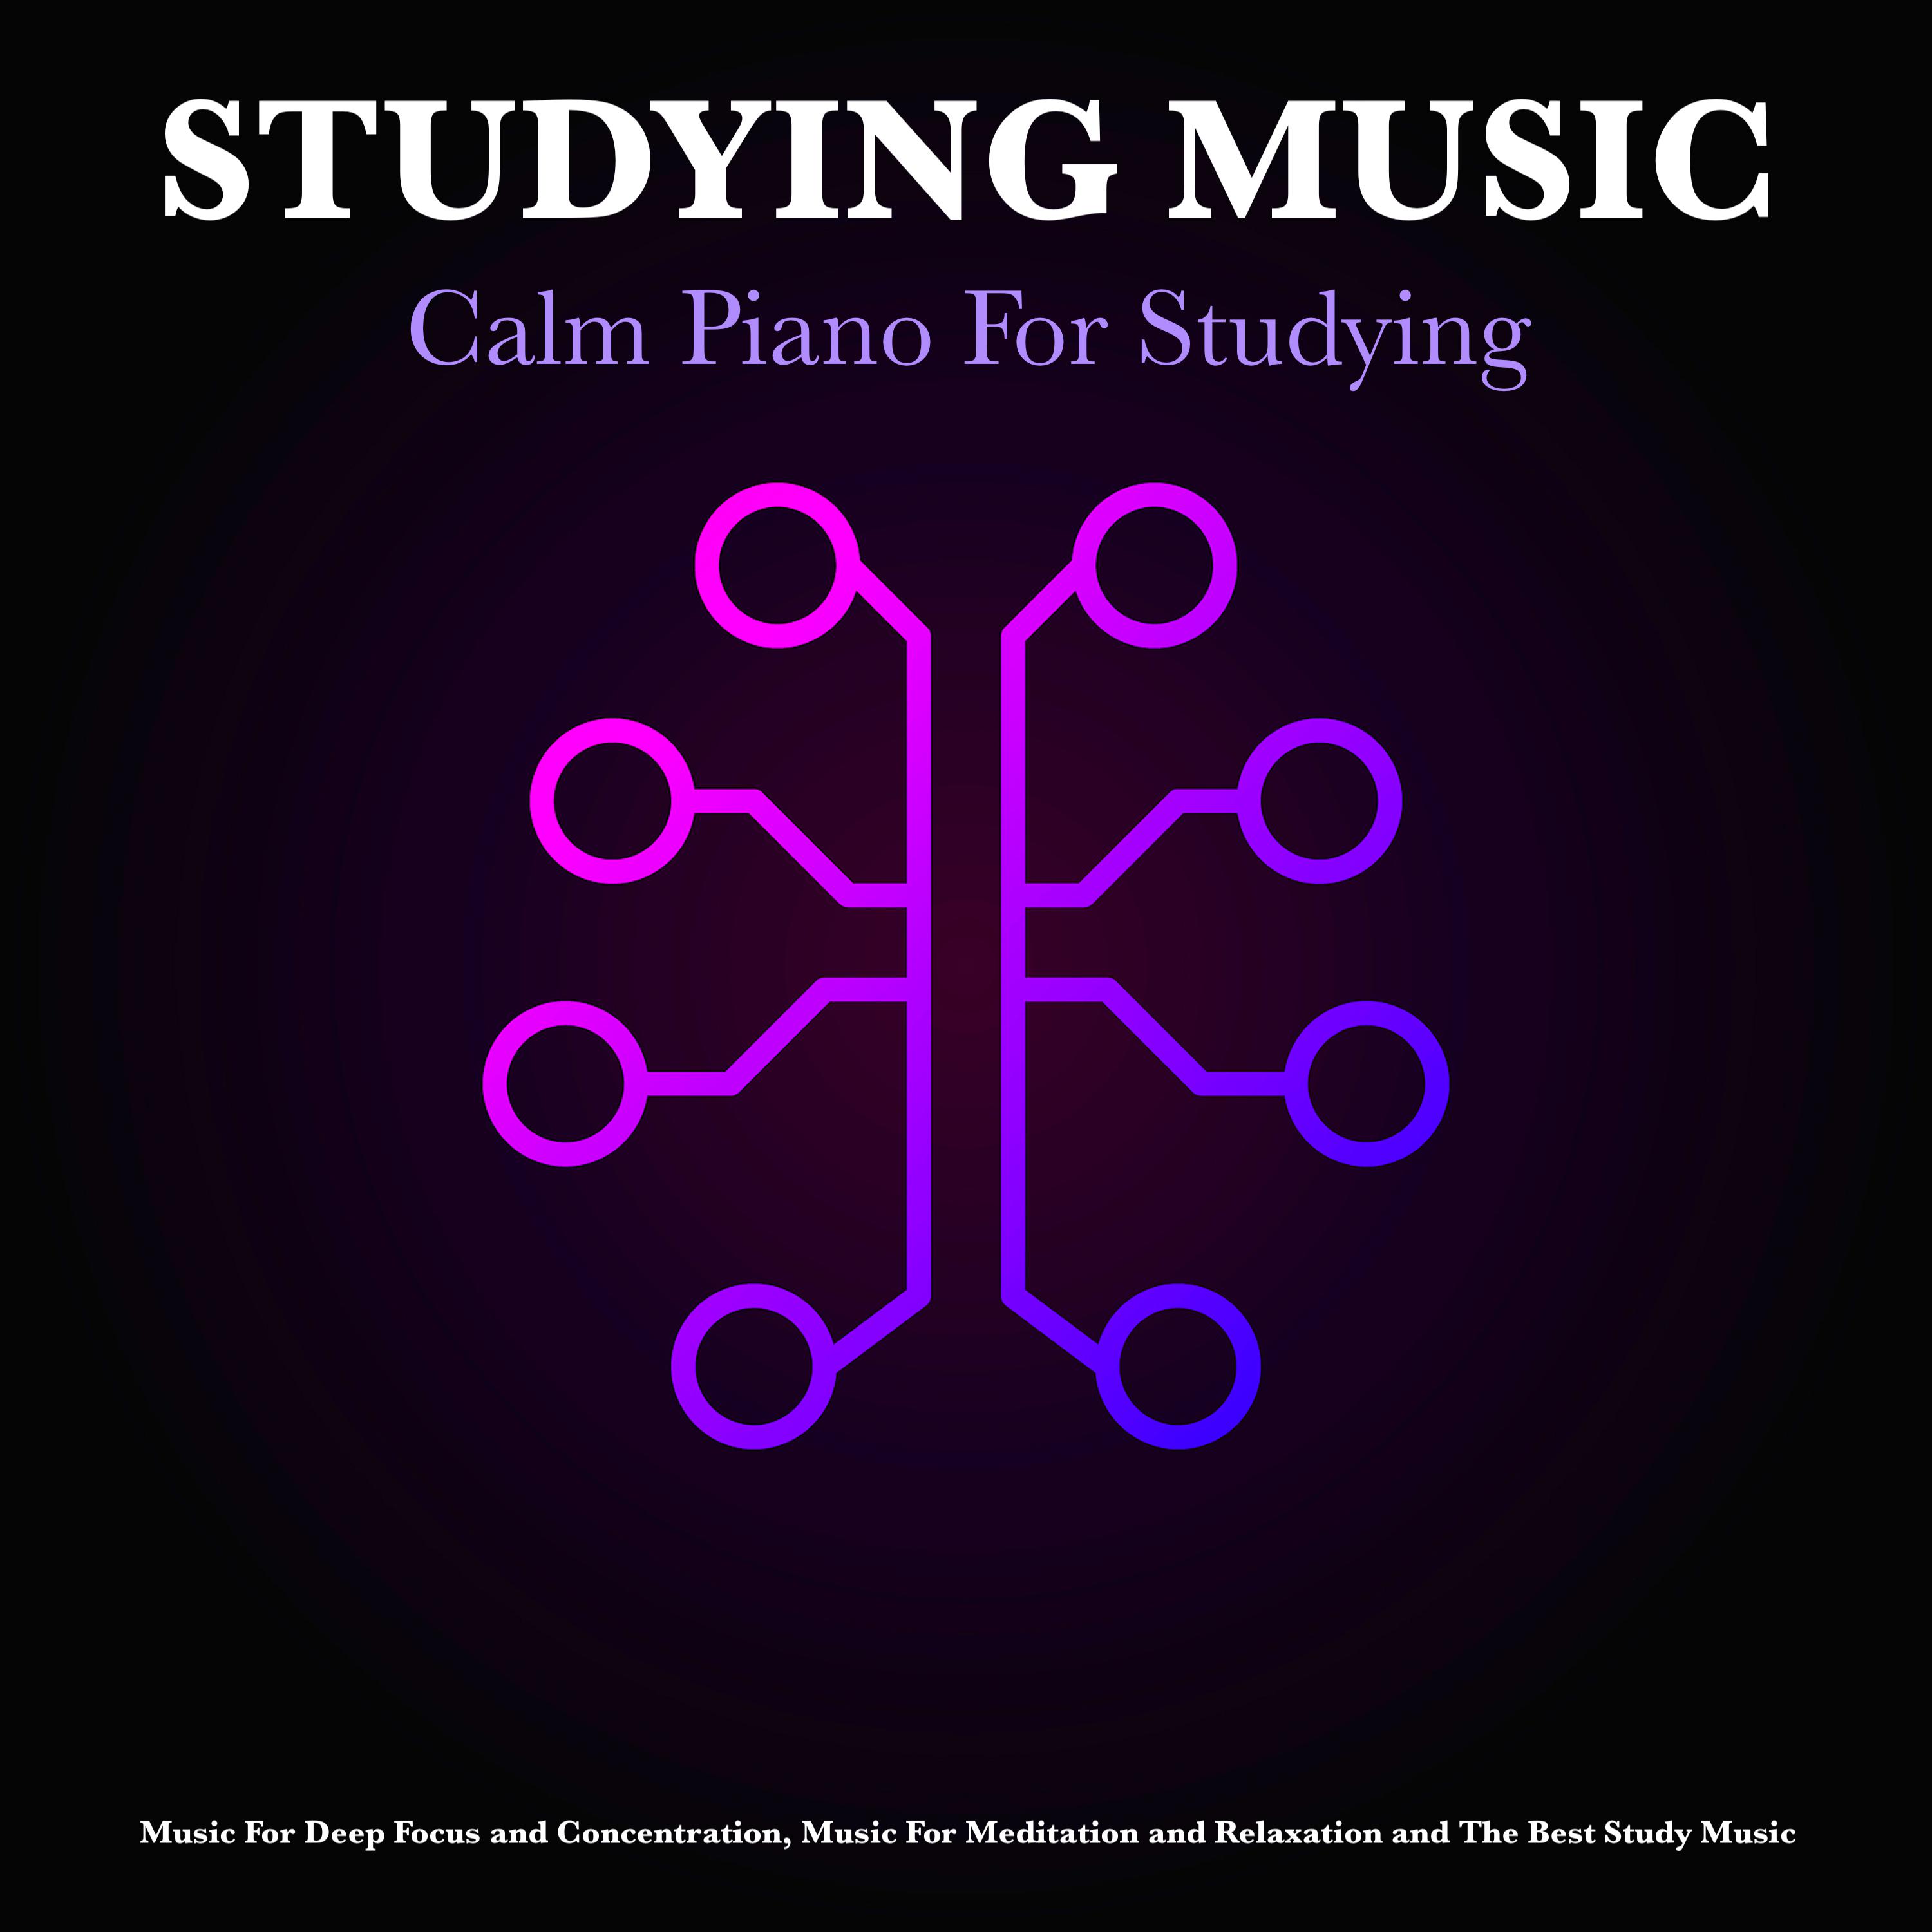 Studying Music For Focus and Concentration